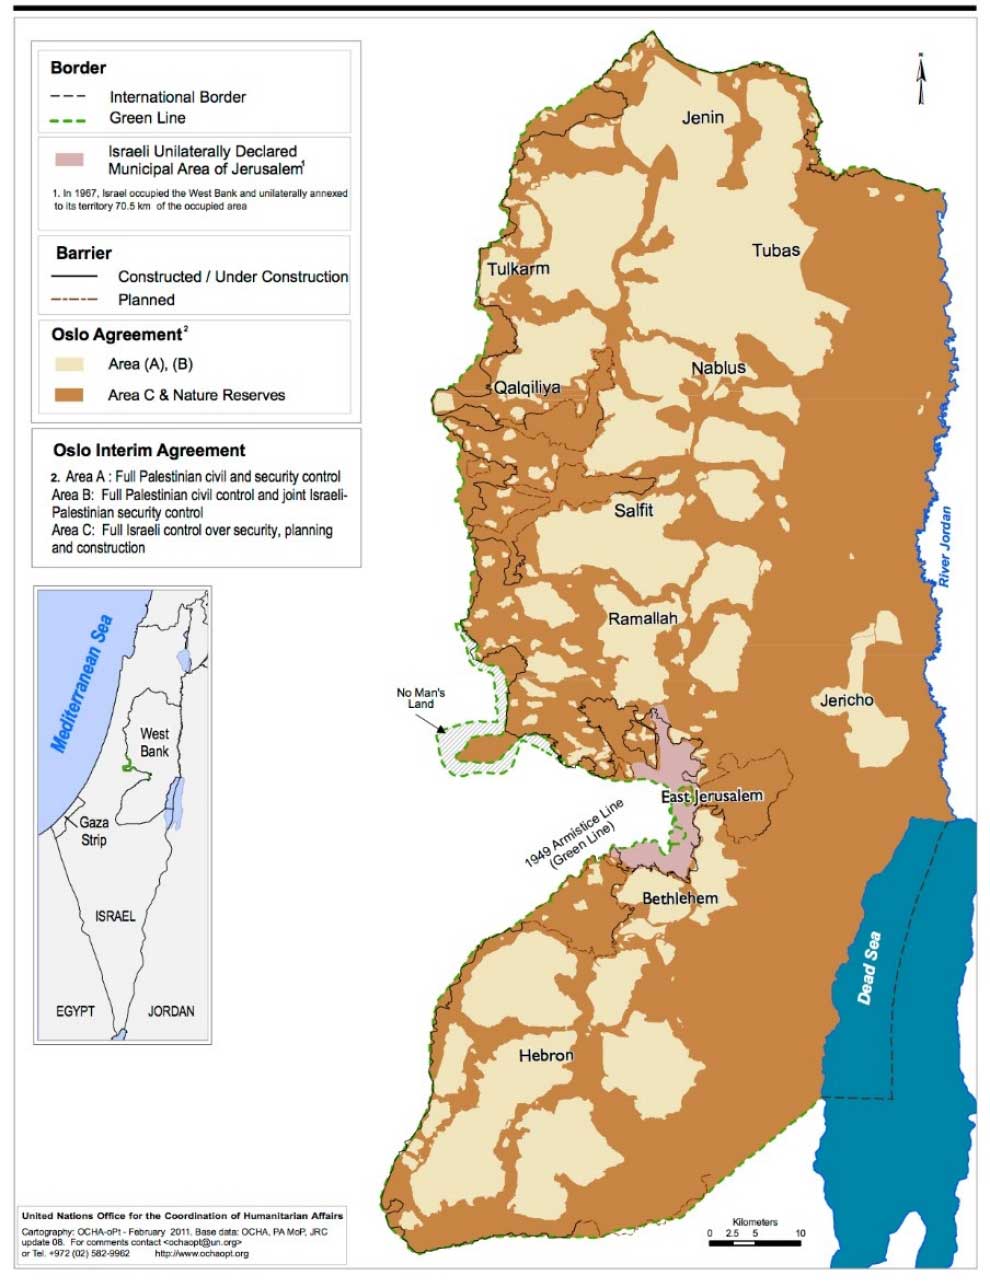 Areas A, B, & C in the West Bank. Credit: UN OCHA, February 2011